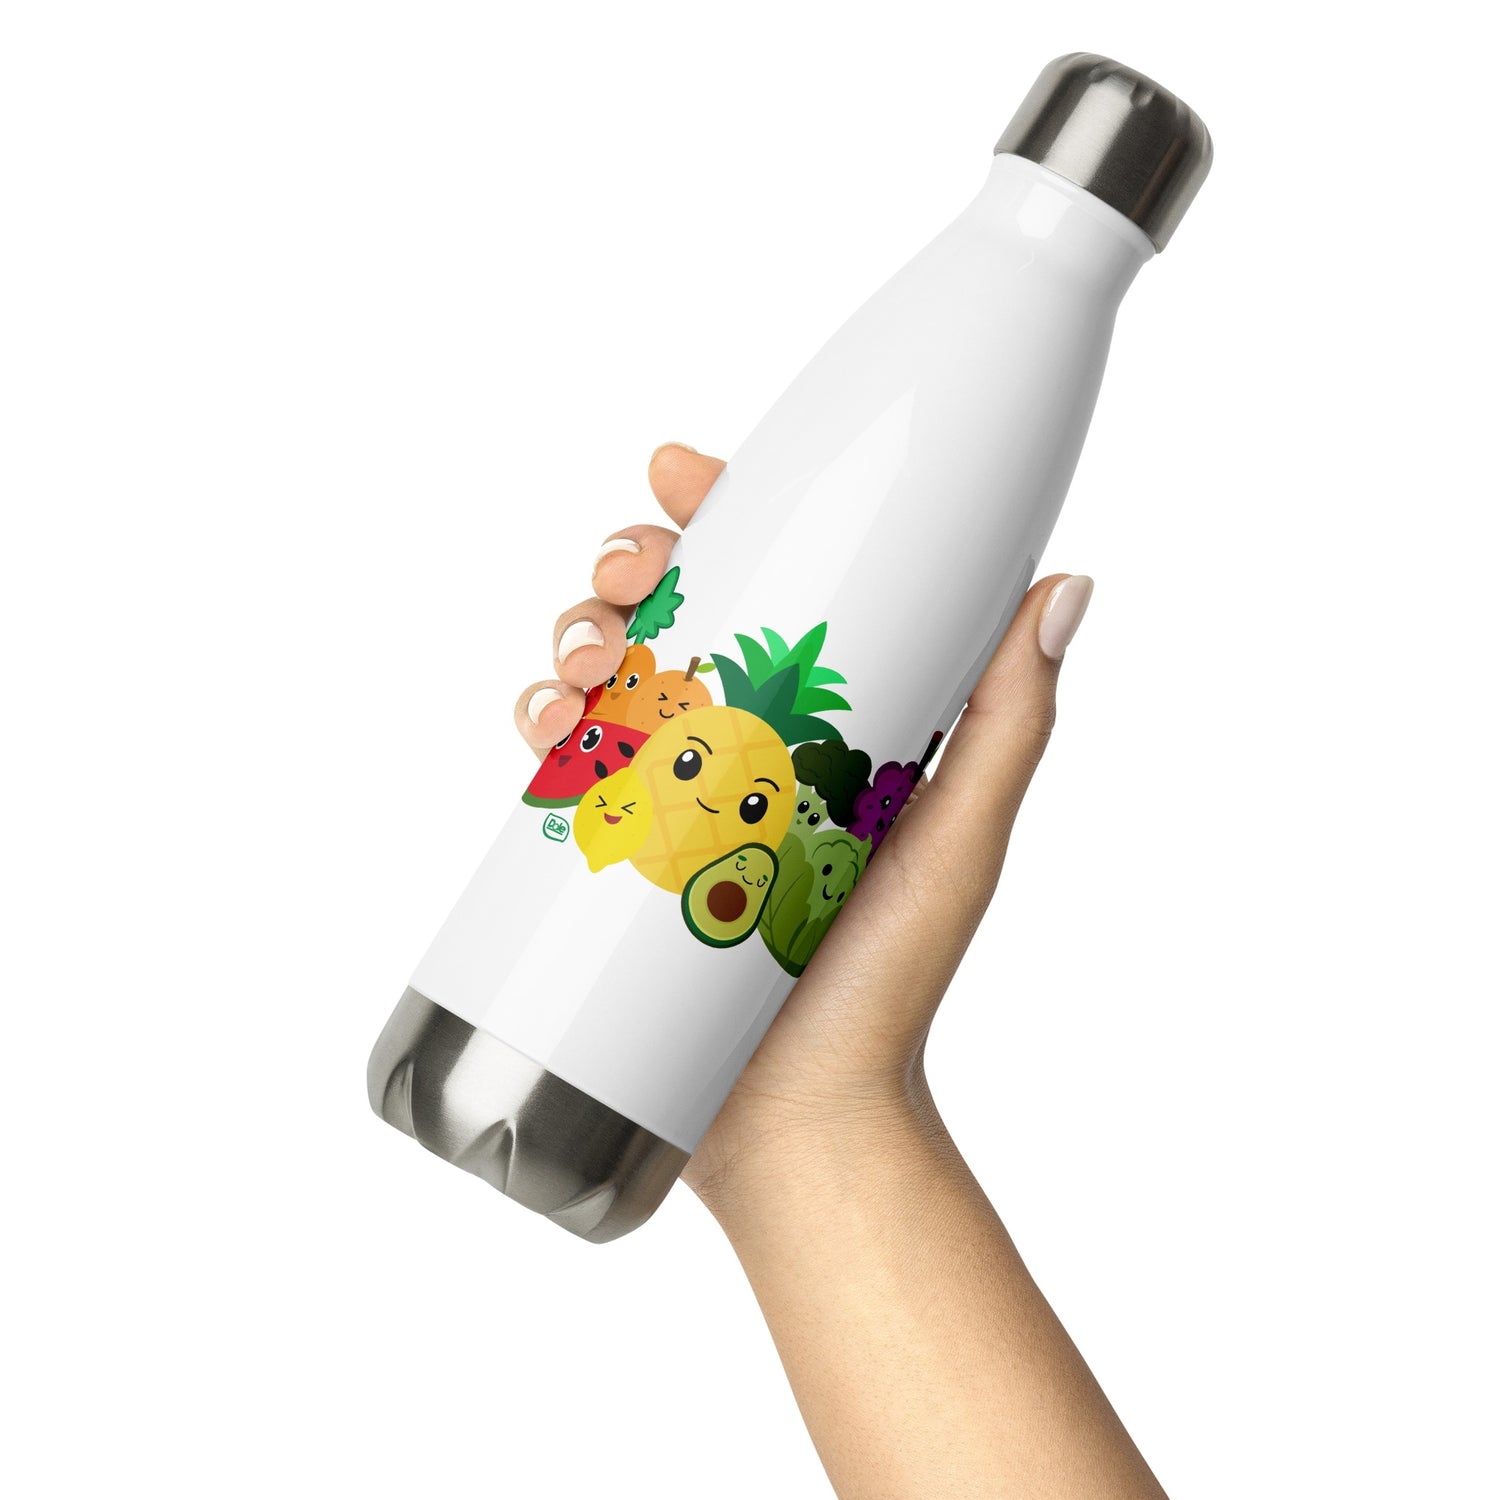 Dole I Eat the Rainbow Stainless Steel Water Bottle